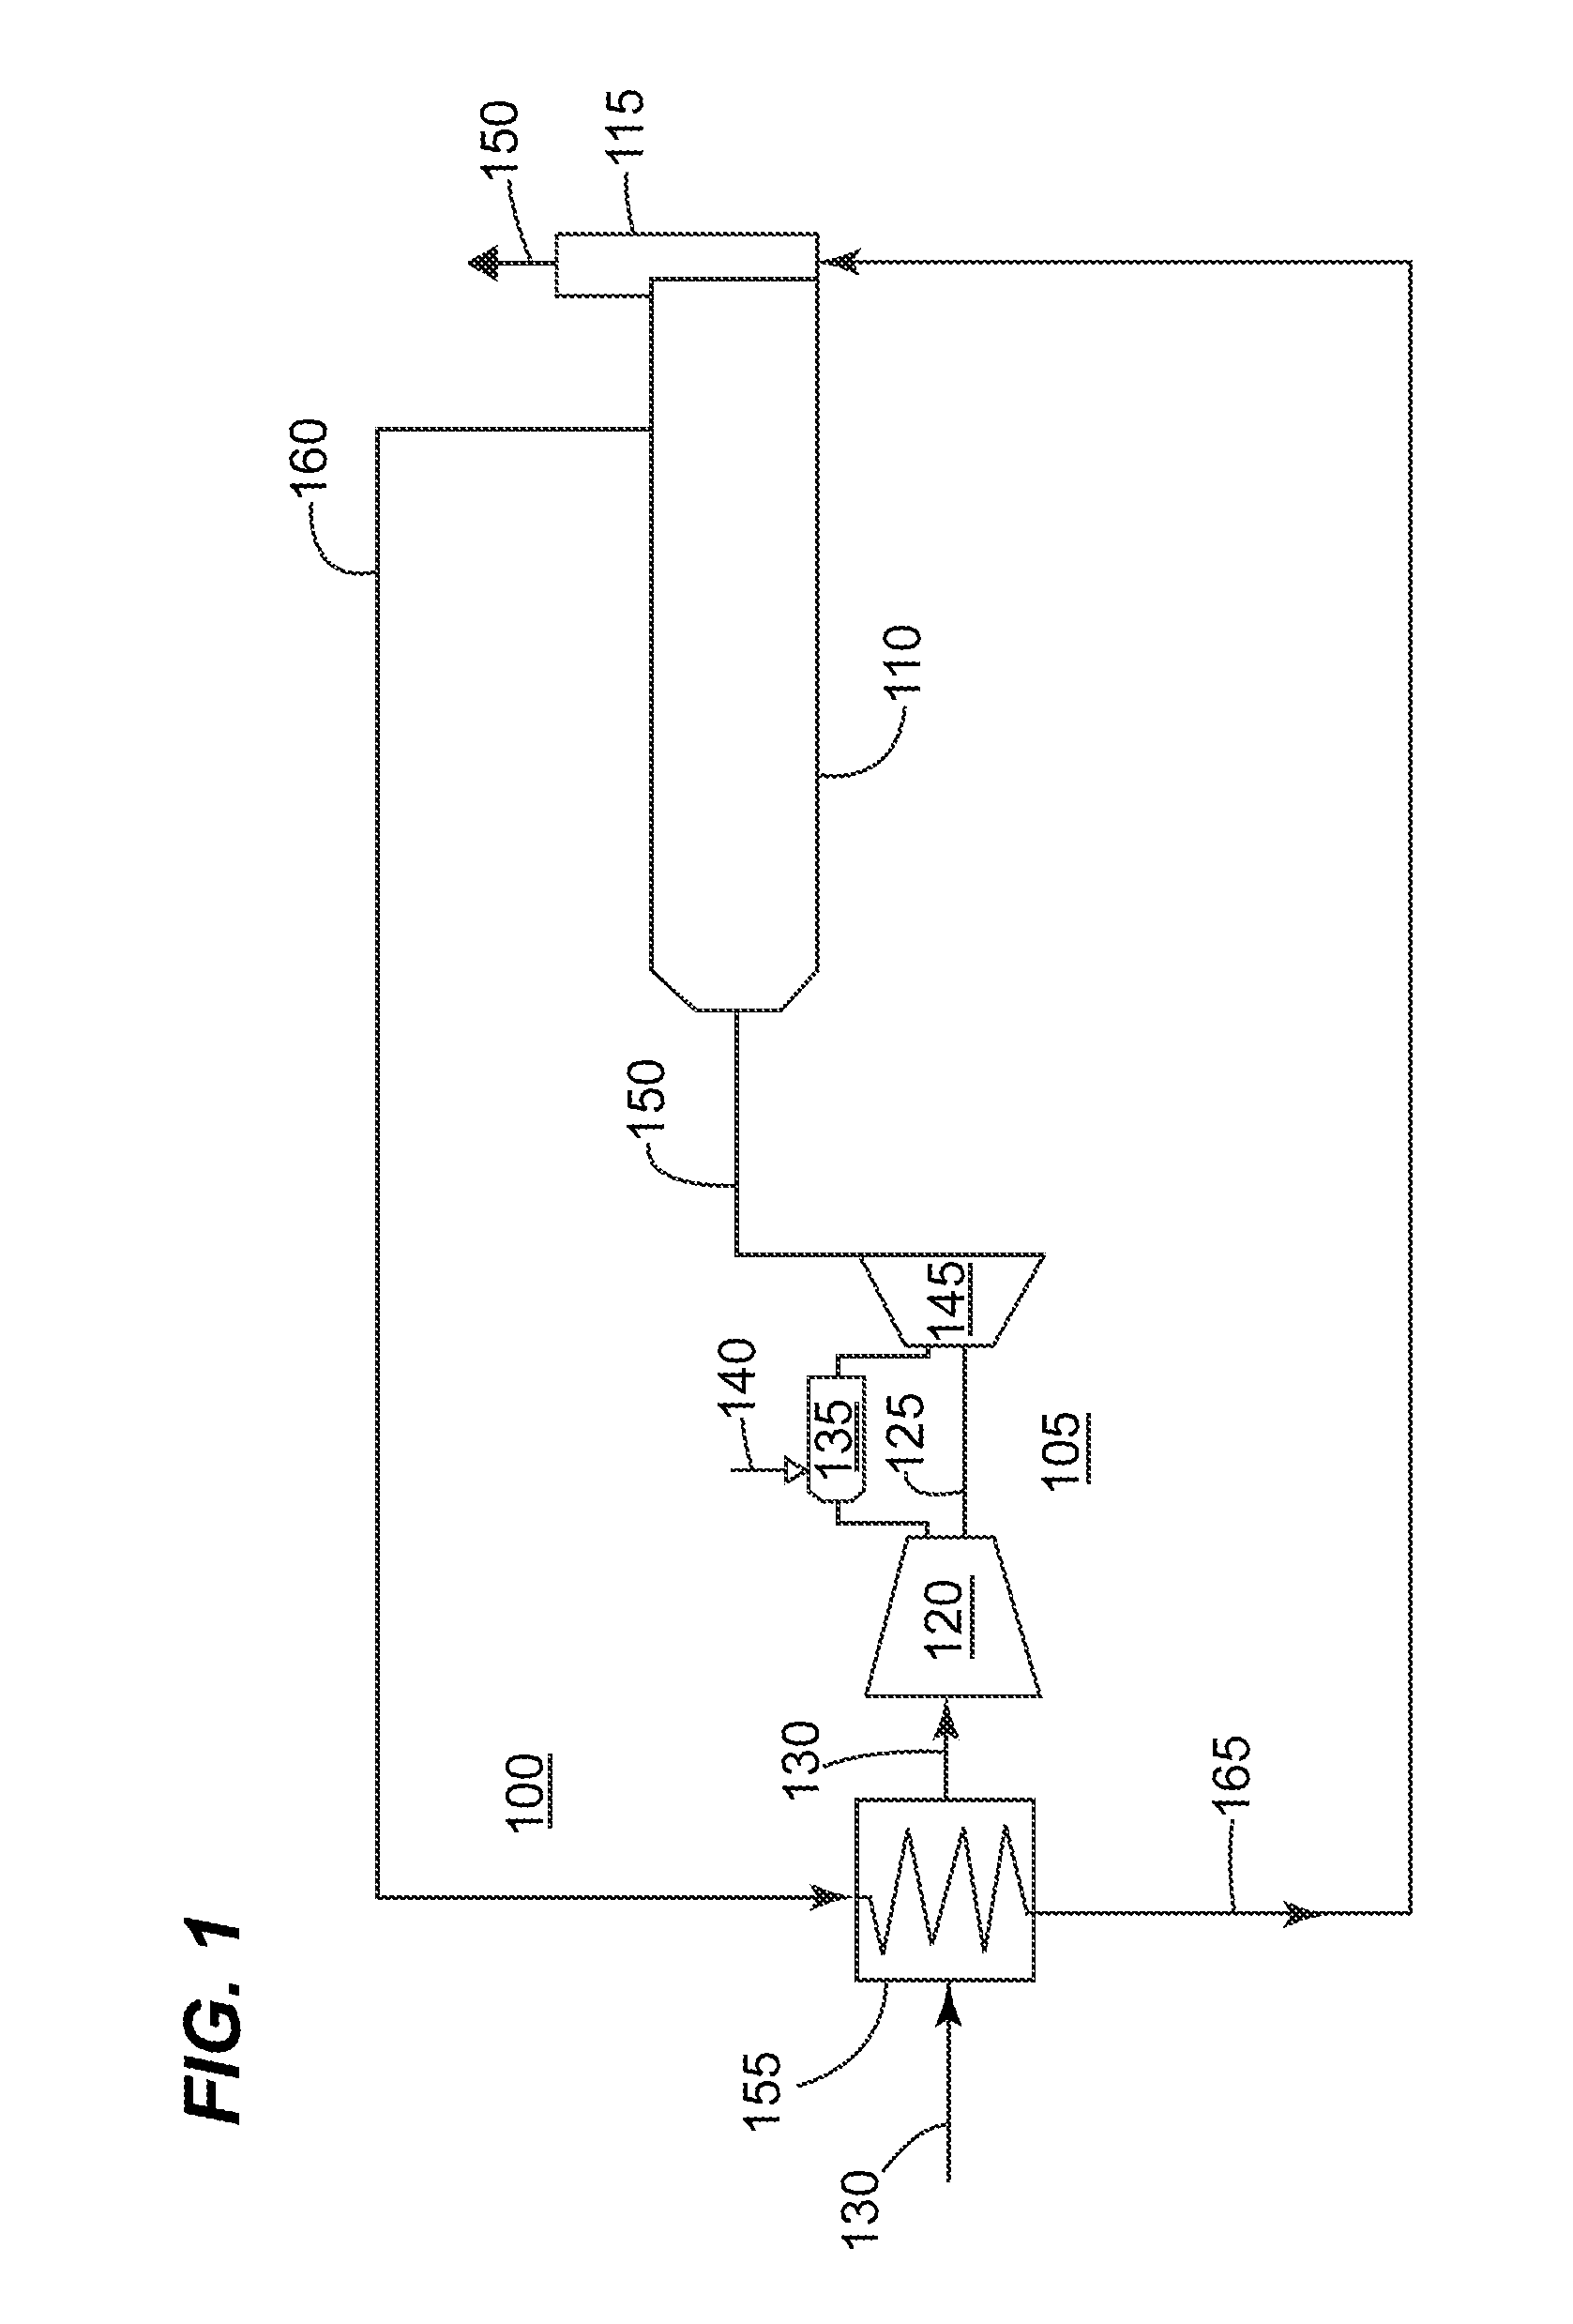 System for extending the turndown range of a turbomachine